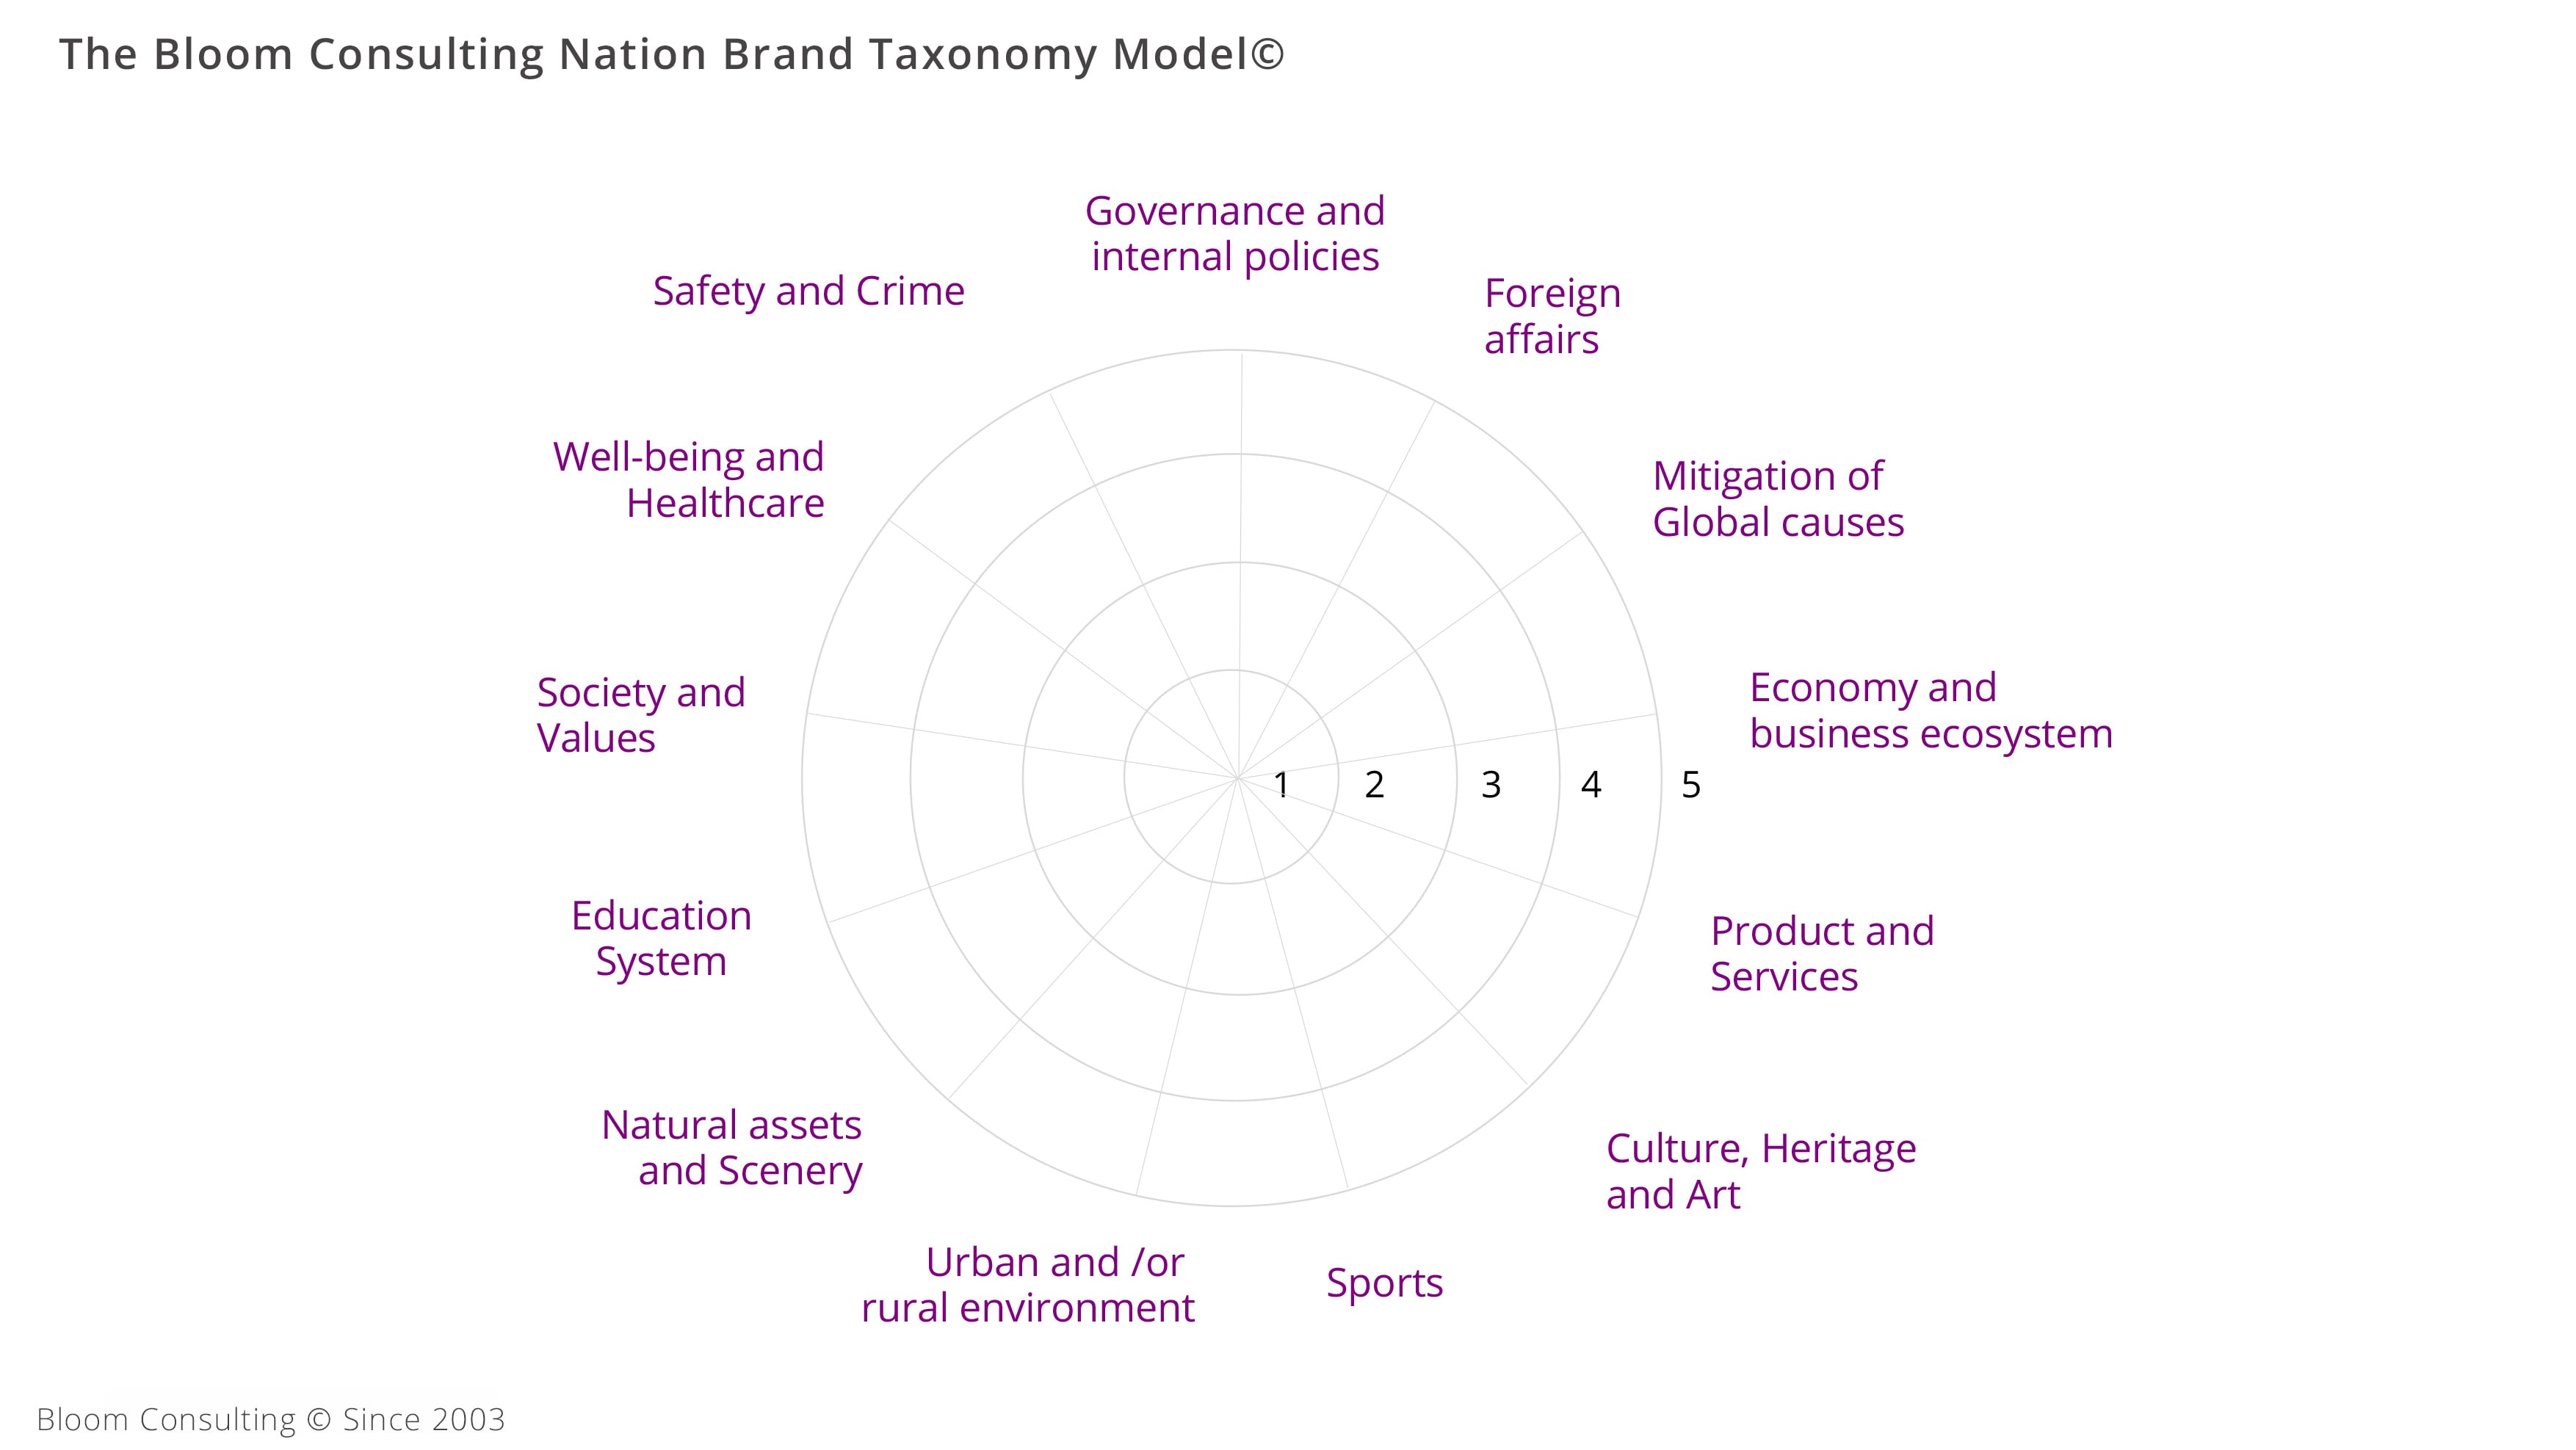 Diagram of The Bloom Consulting Nation Brand Taxonomy Model, featuring thirteen different dimensions